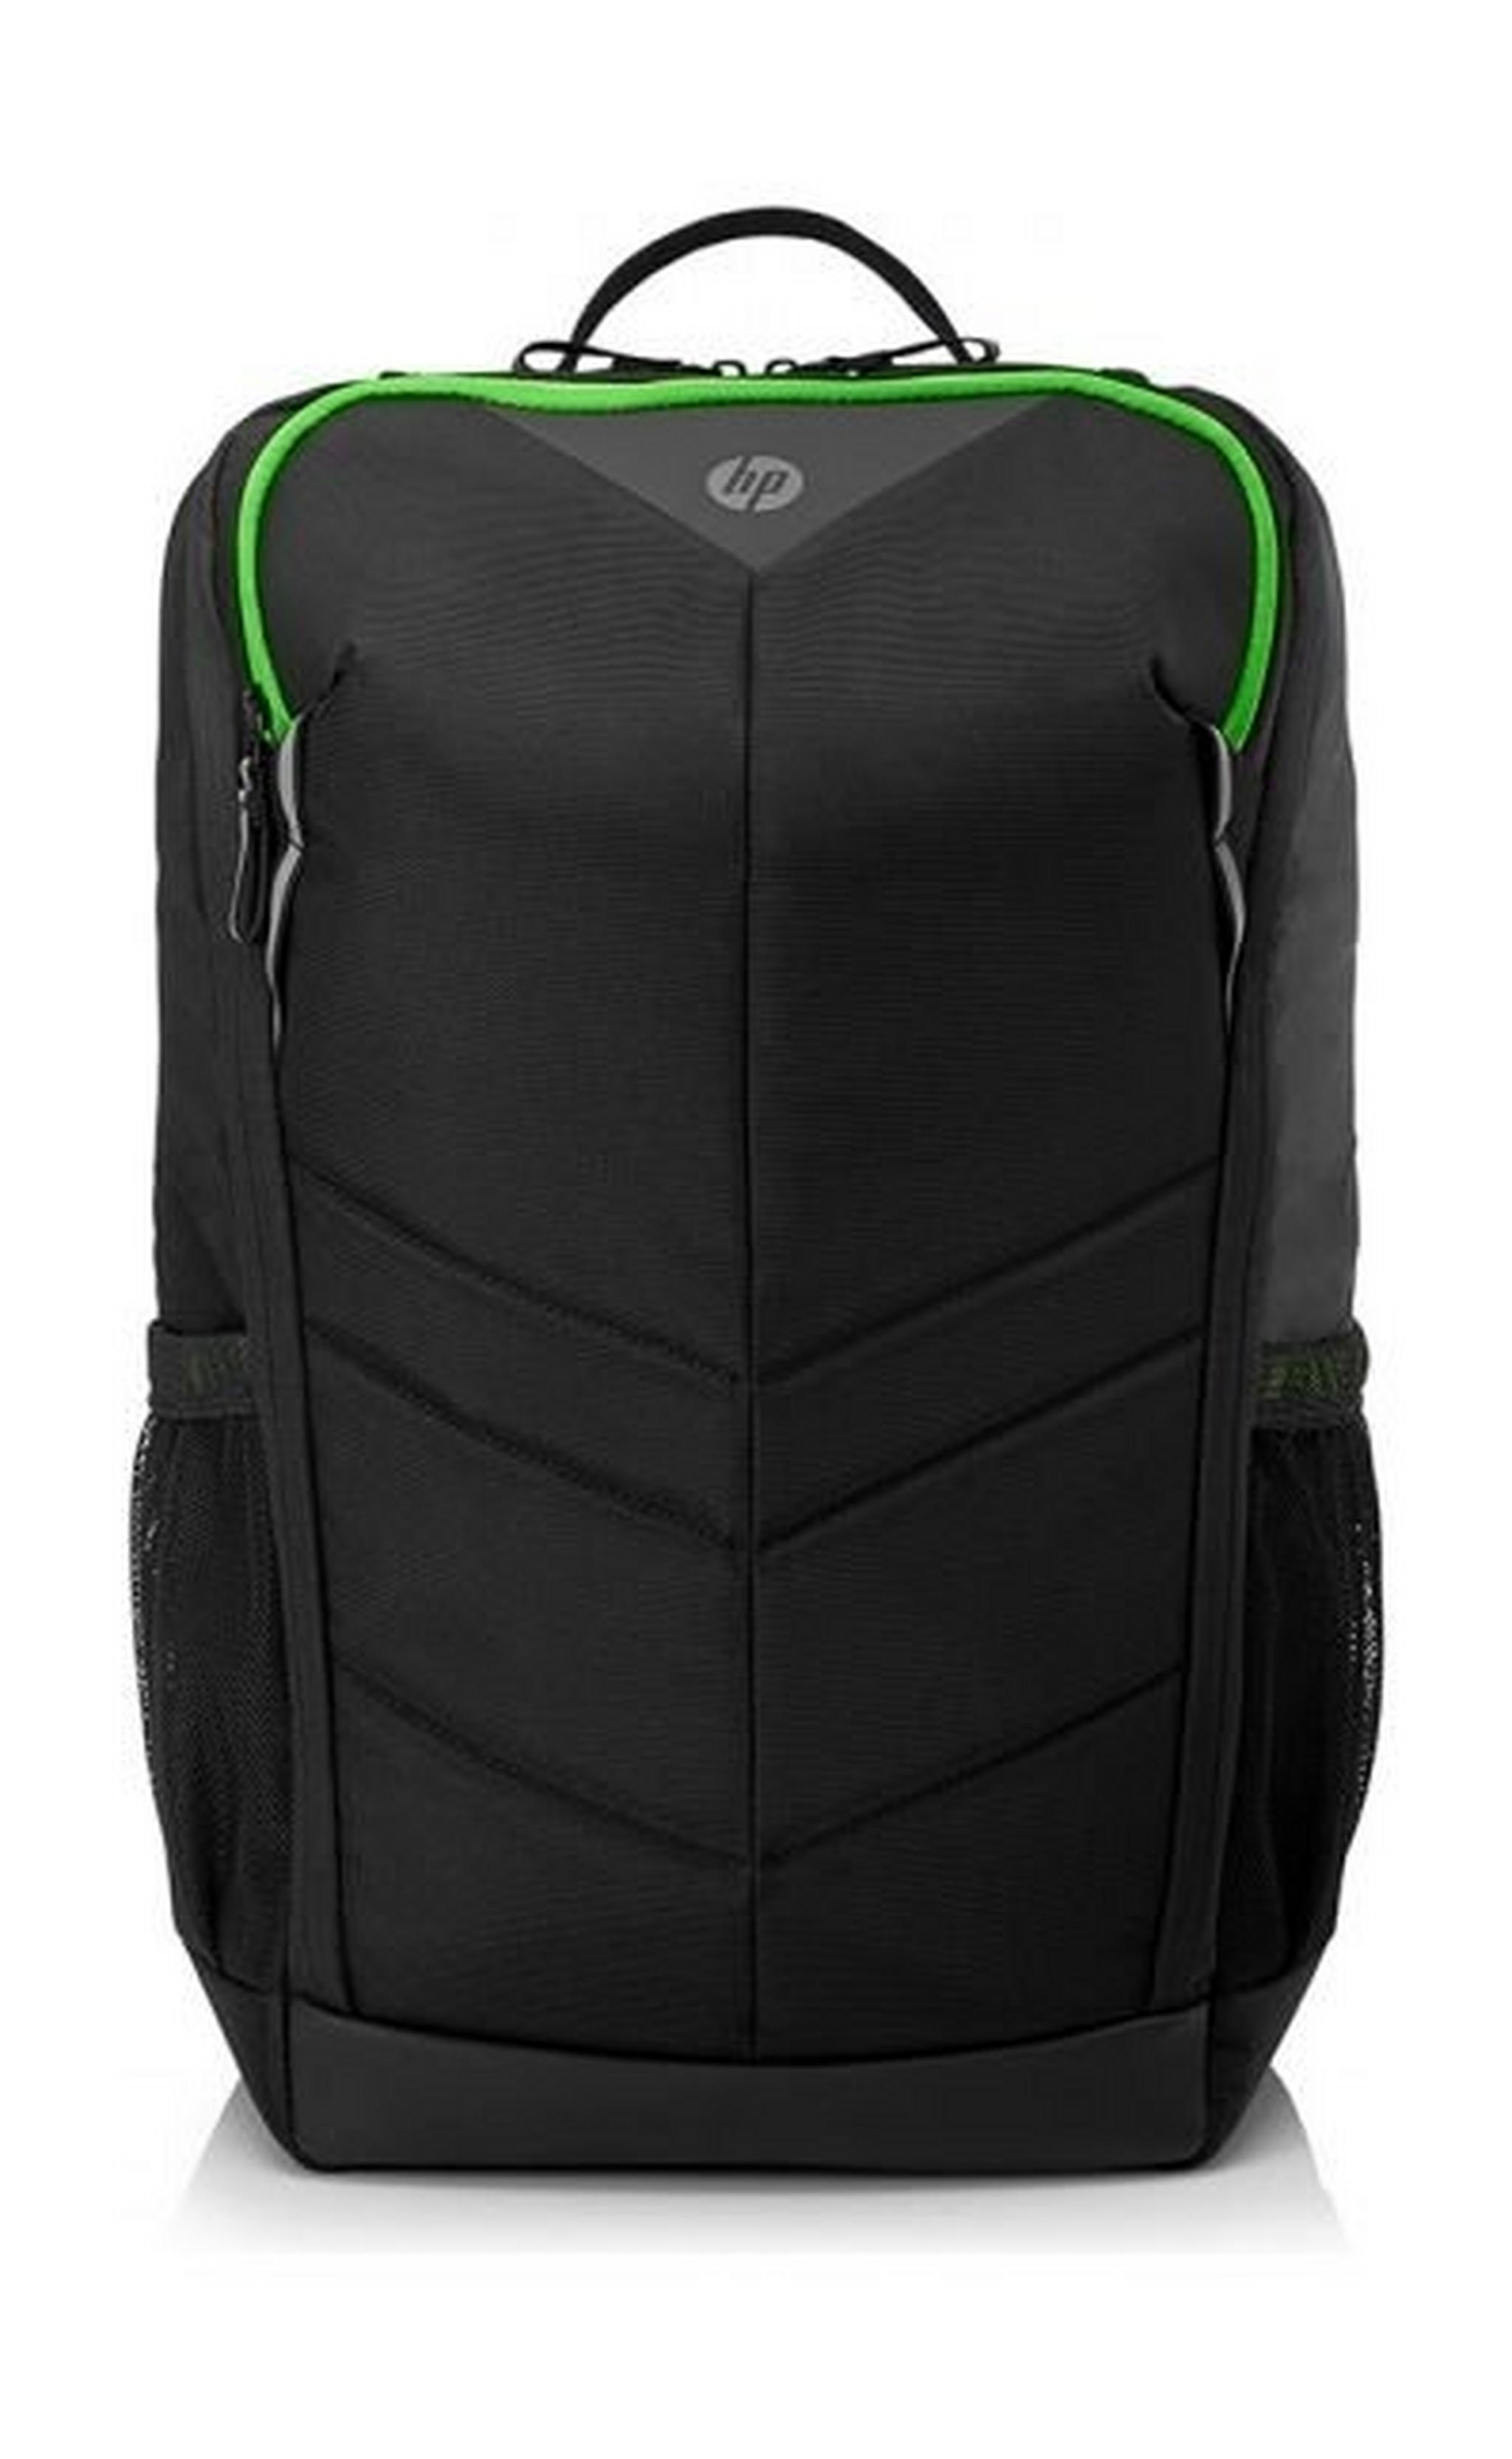 HP Pavilion Gaming Backpack 400 for up to 15-inch Laptop